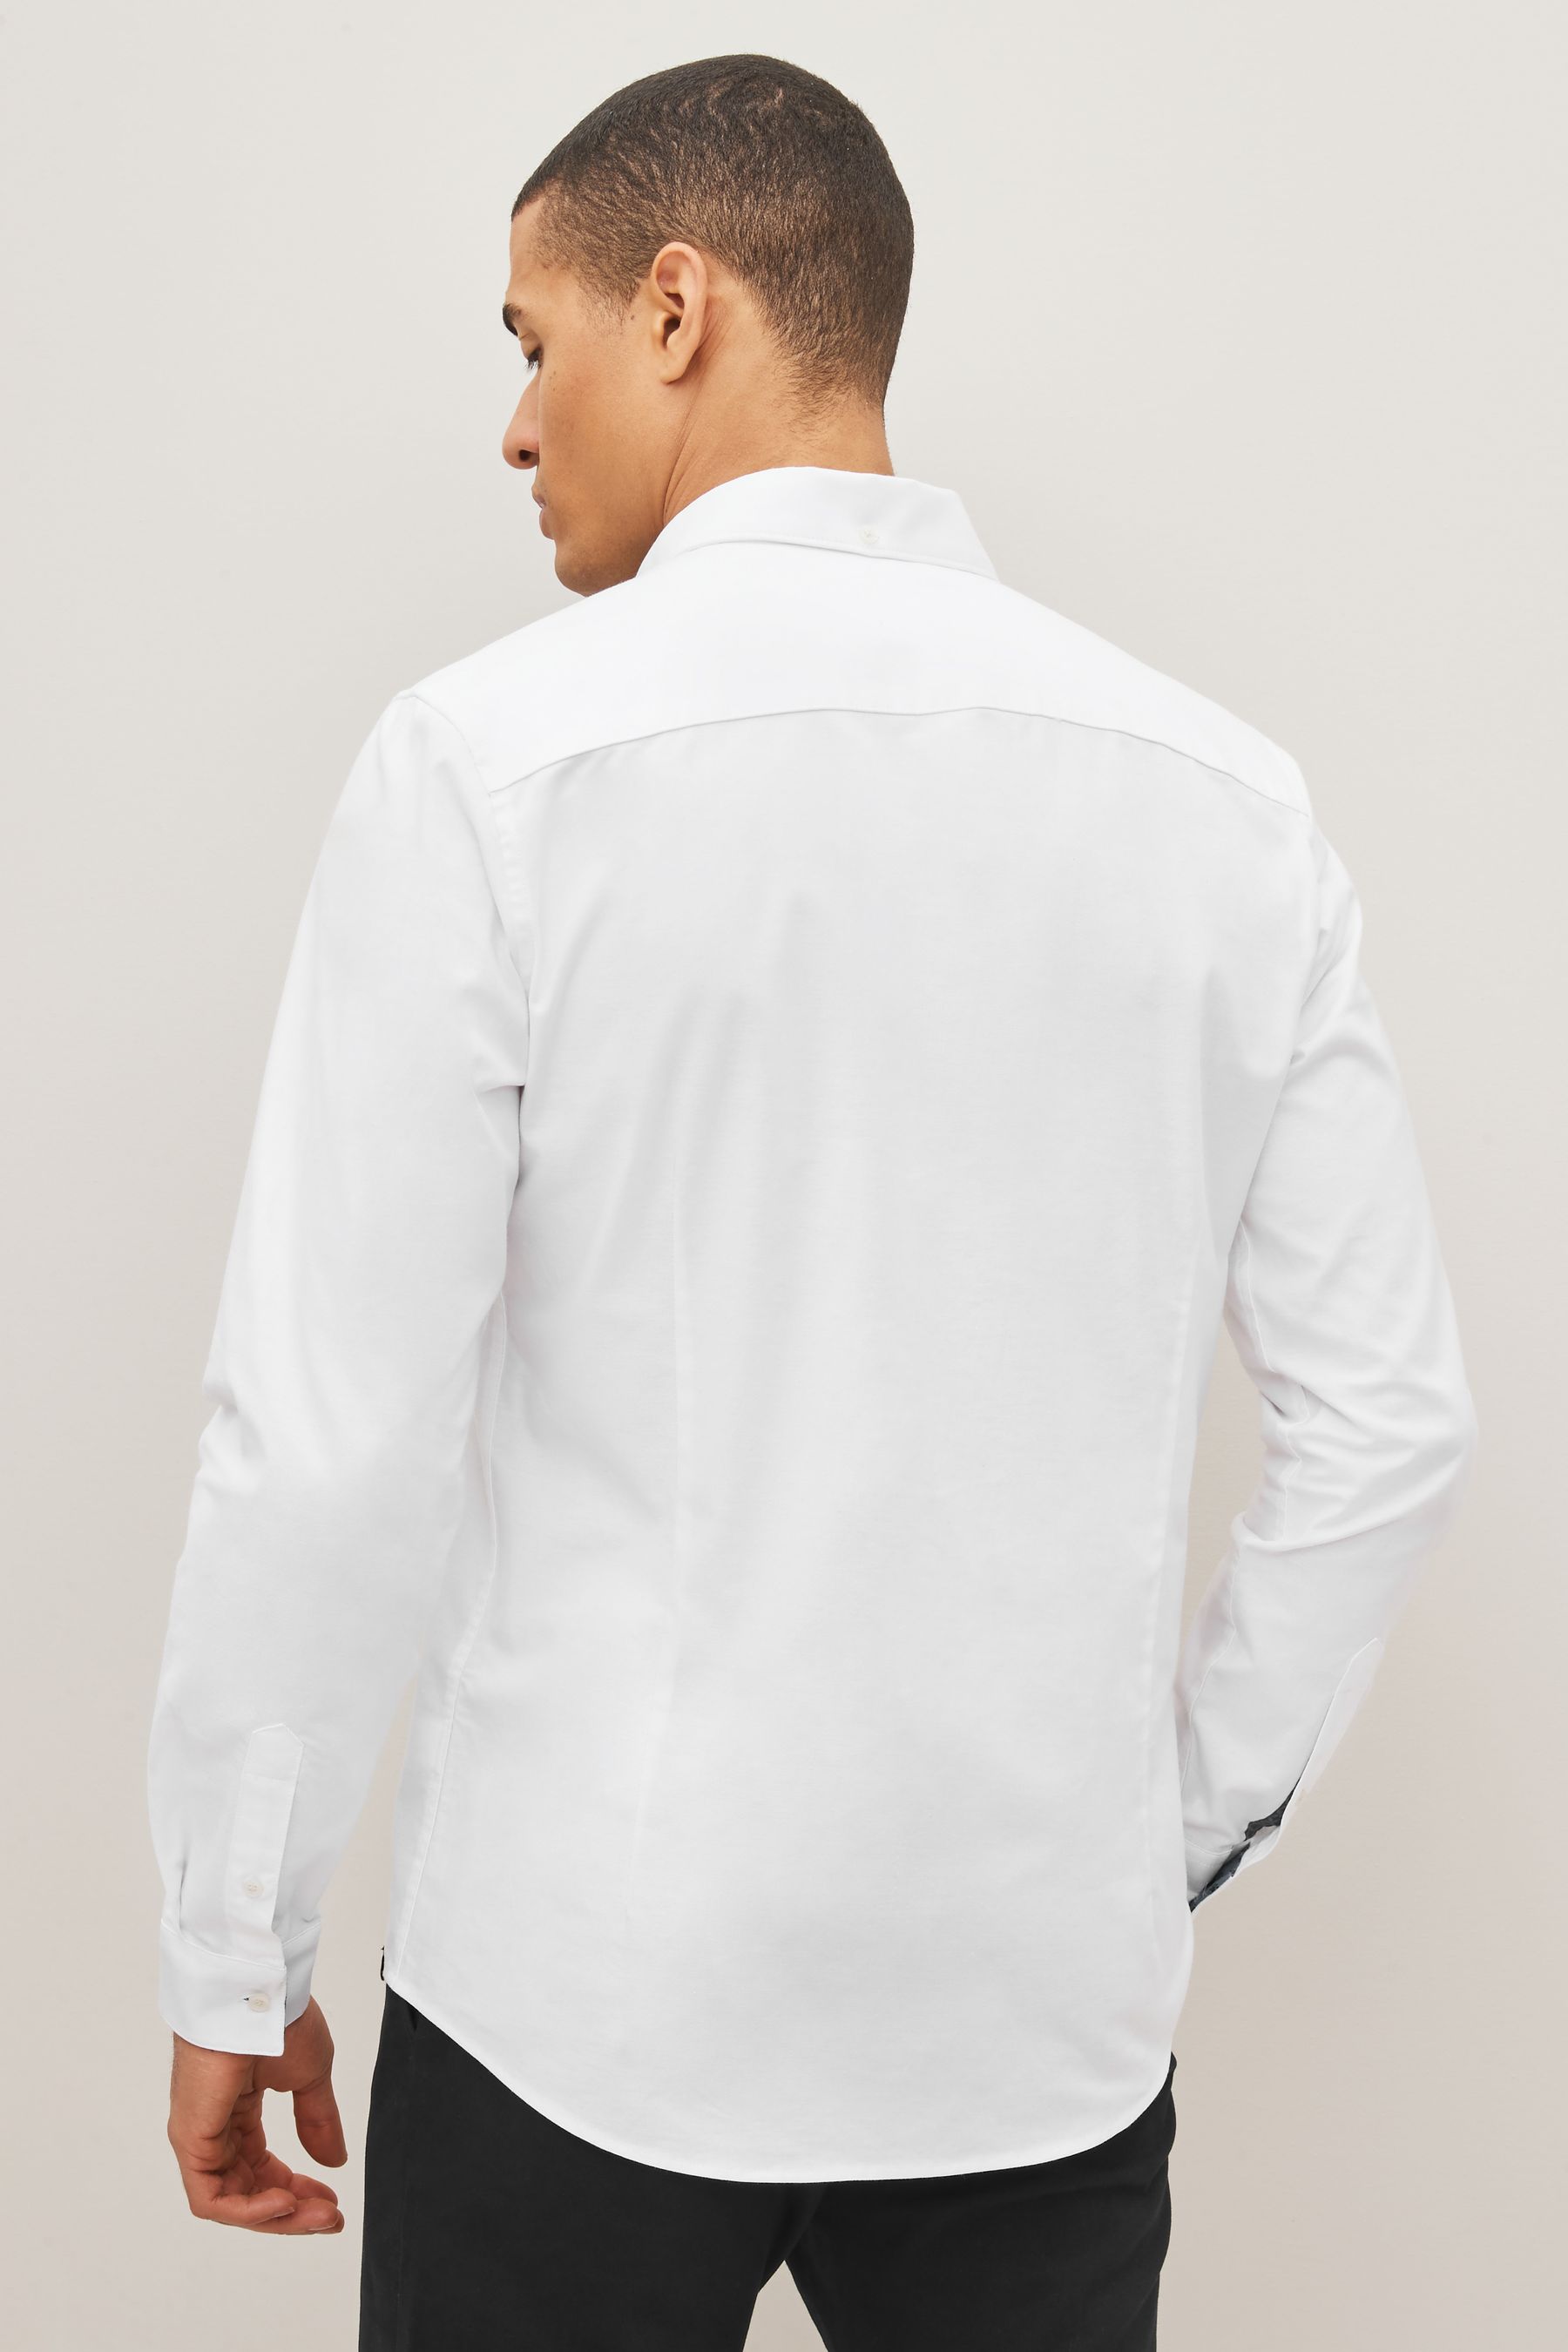 Buy Stretch Oxford Slim Fit Long Sleeve Shirt from the Next UK online shop